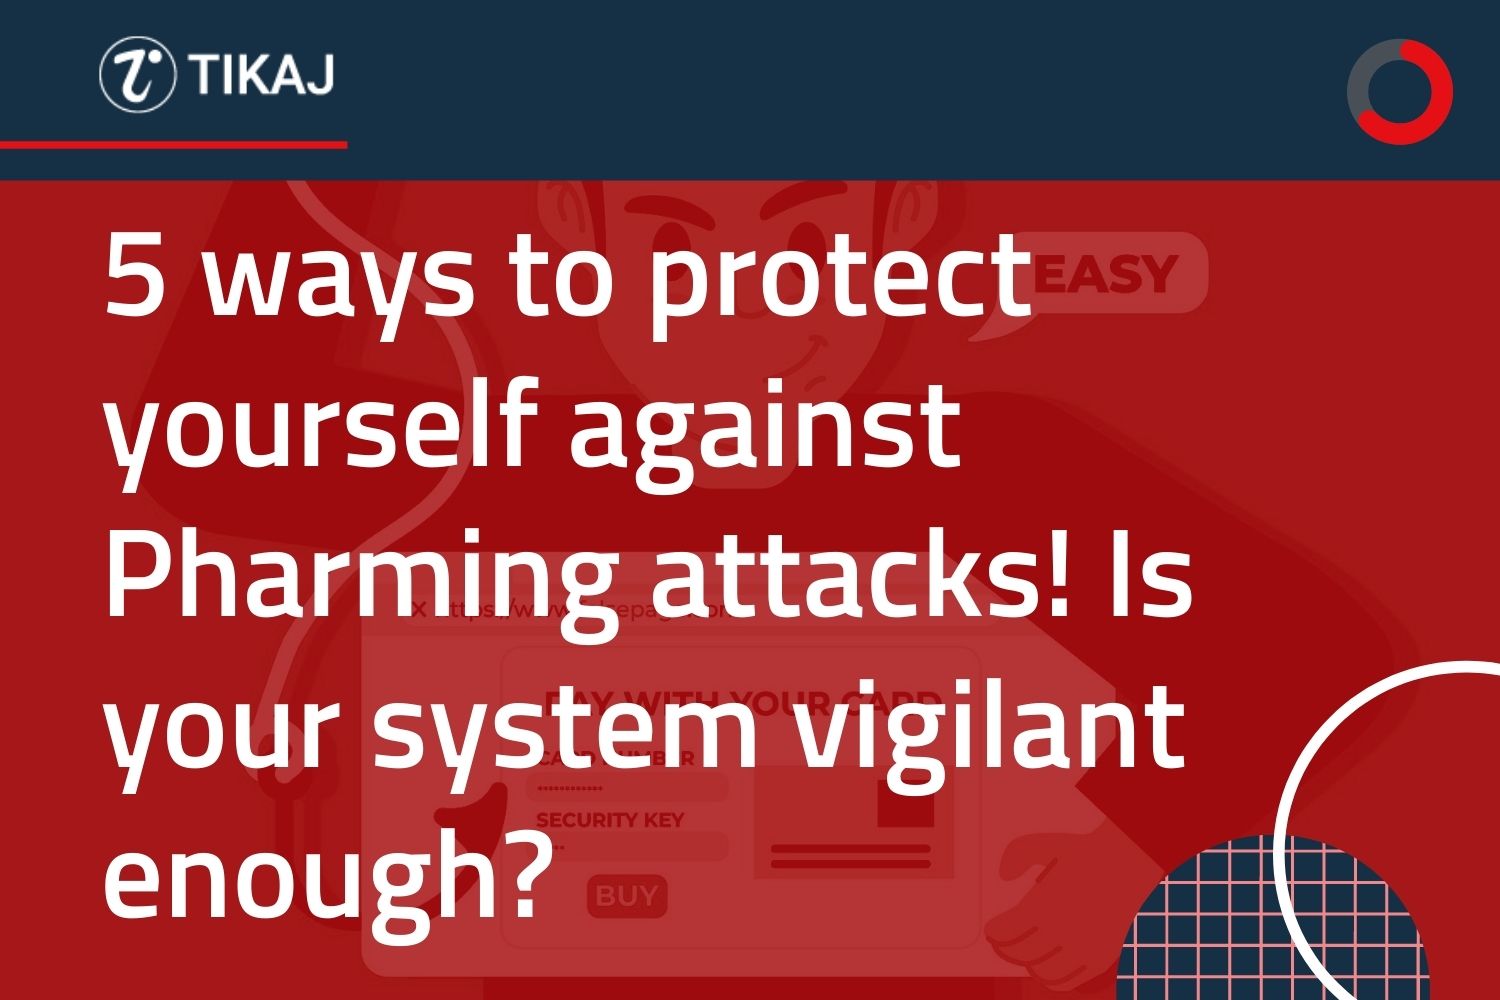 5 ways to protect yourself against Pharming attacks! Is your system vigilant enough?